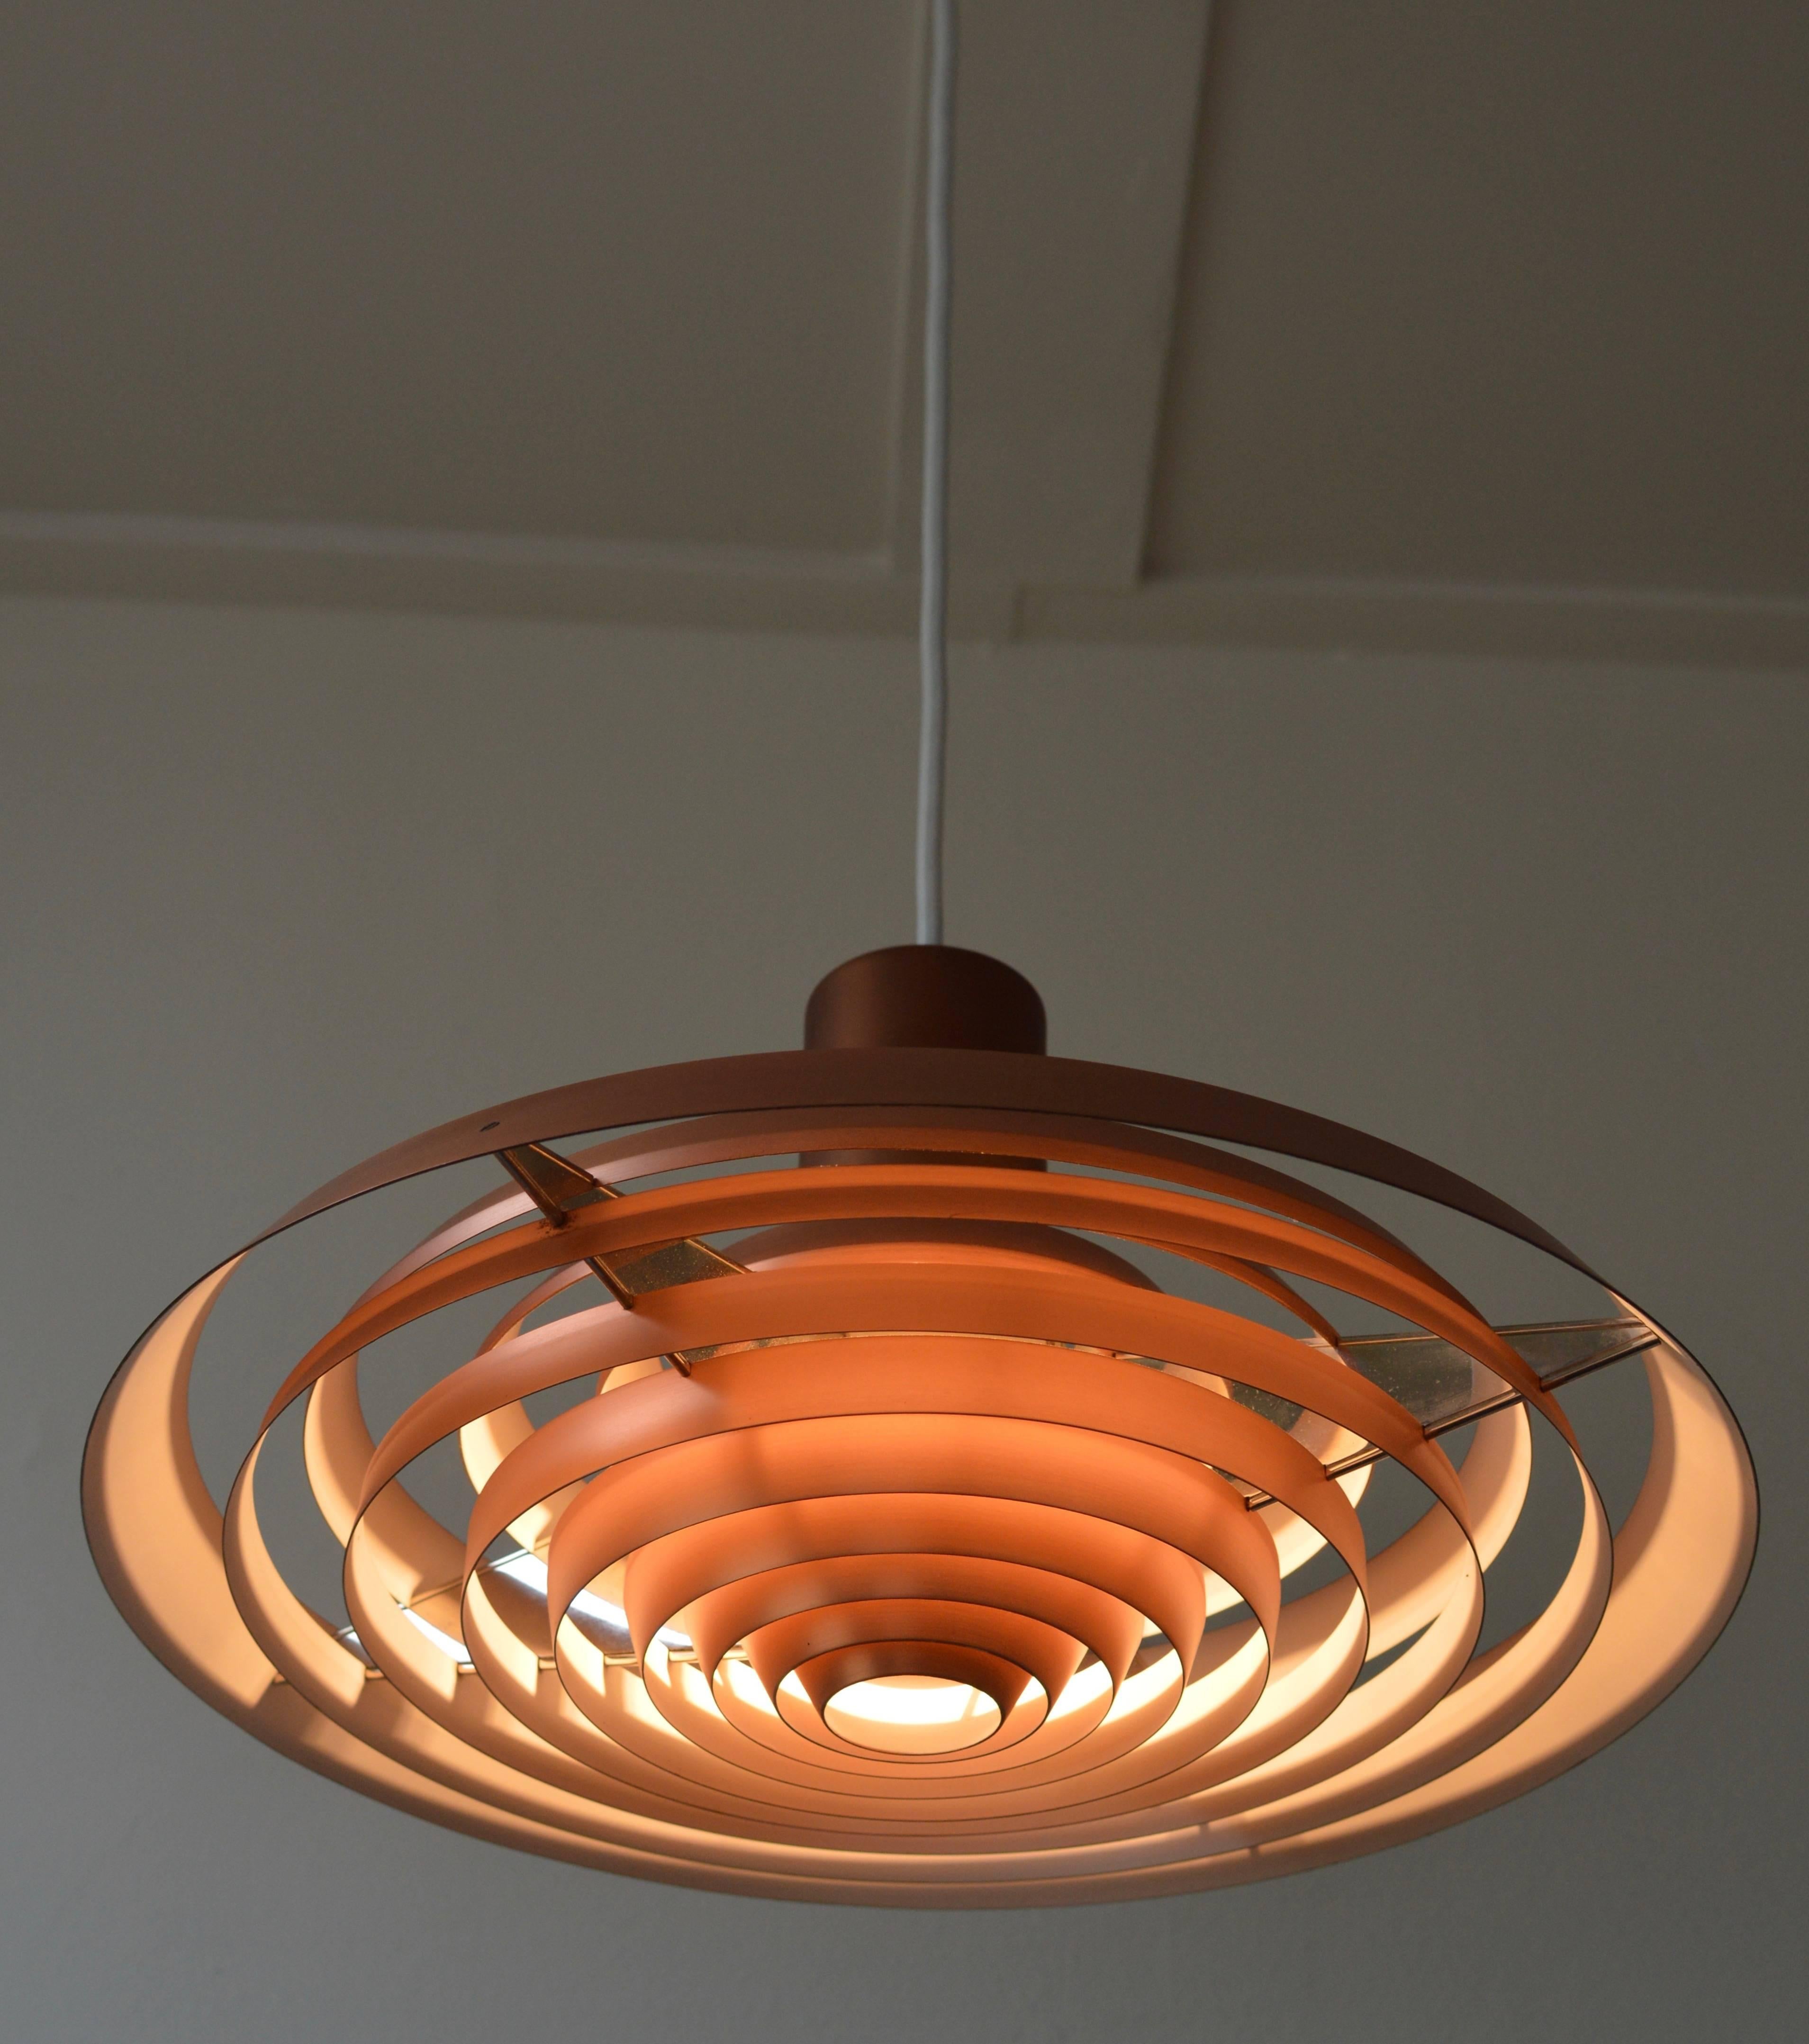 Beautiful copper Langelinie plate pendant by Poul Henningsen for Louis Poulsen originally designed in 1958 for the Langelinie Pavilion in Copenhagen and inspired by the pattern of rings in the water surrounding the Pavilion.
This lamp was produced